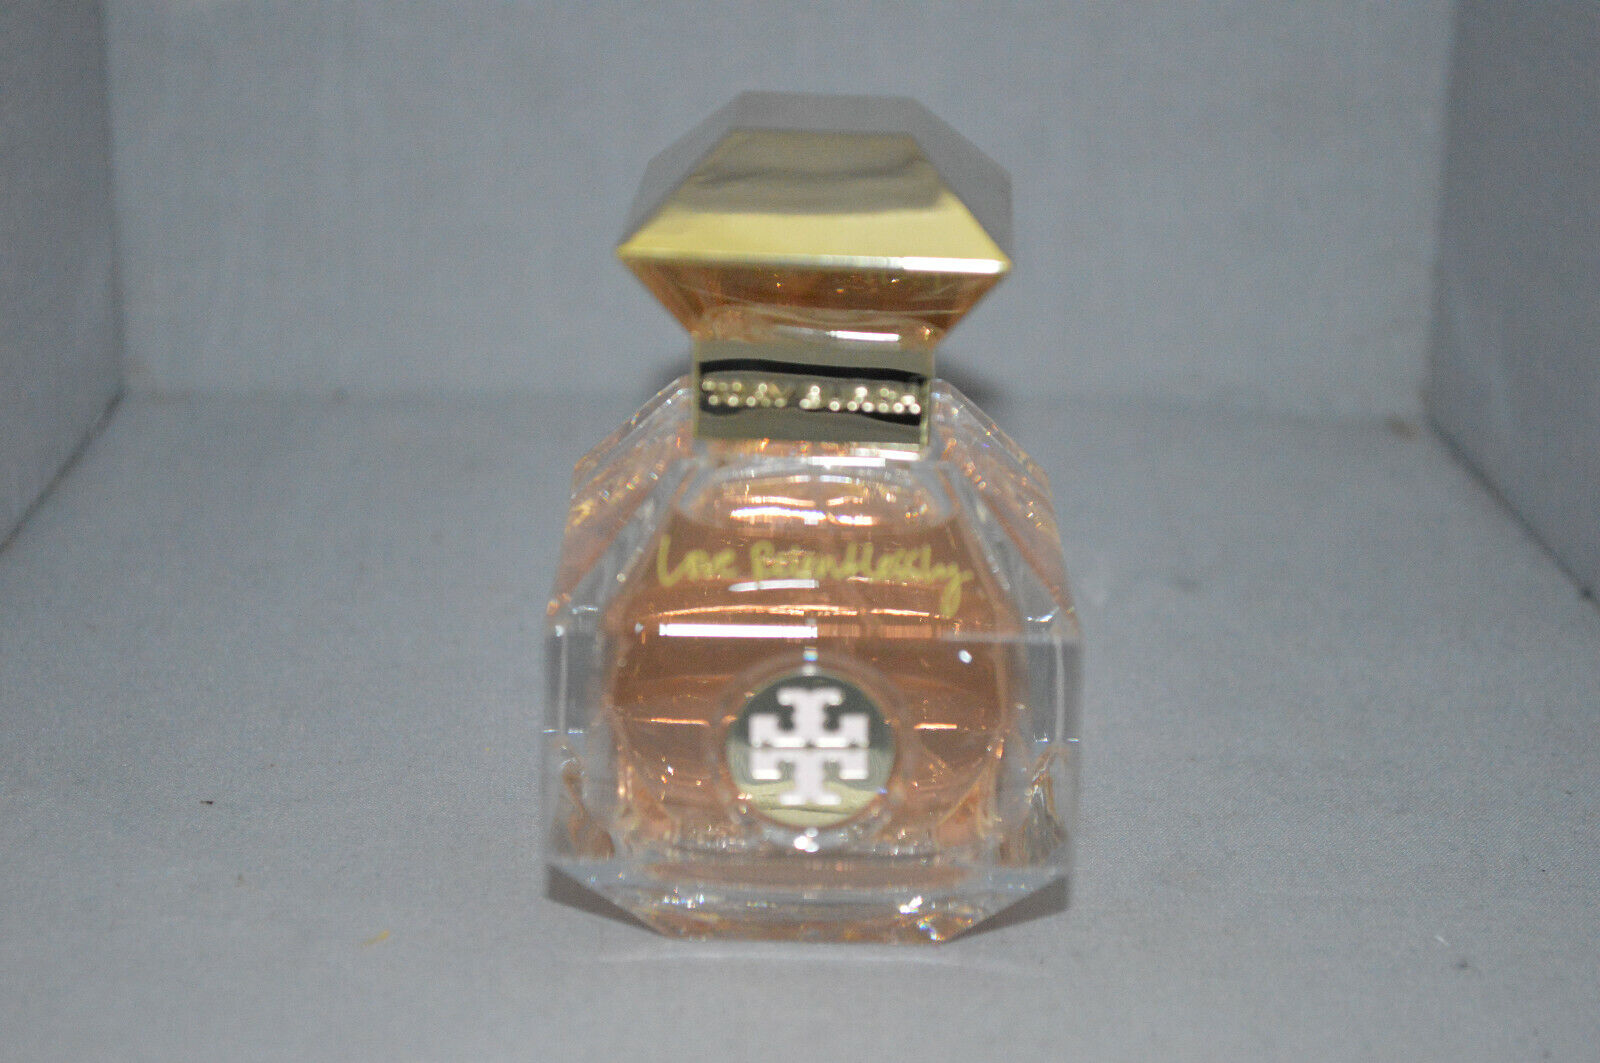 Tory Burch Love Relentlessly 1.7oz EDP Spray New Unboxed